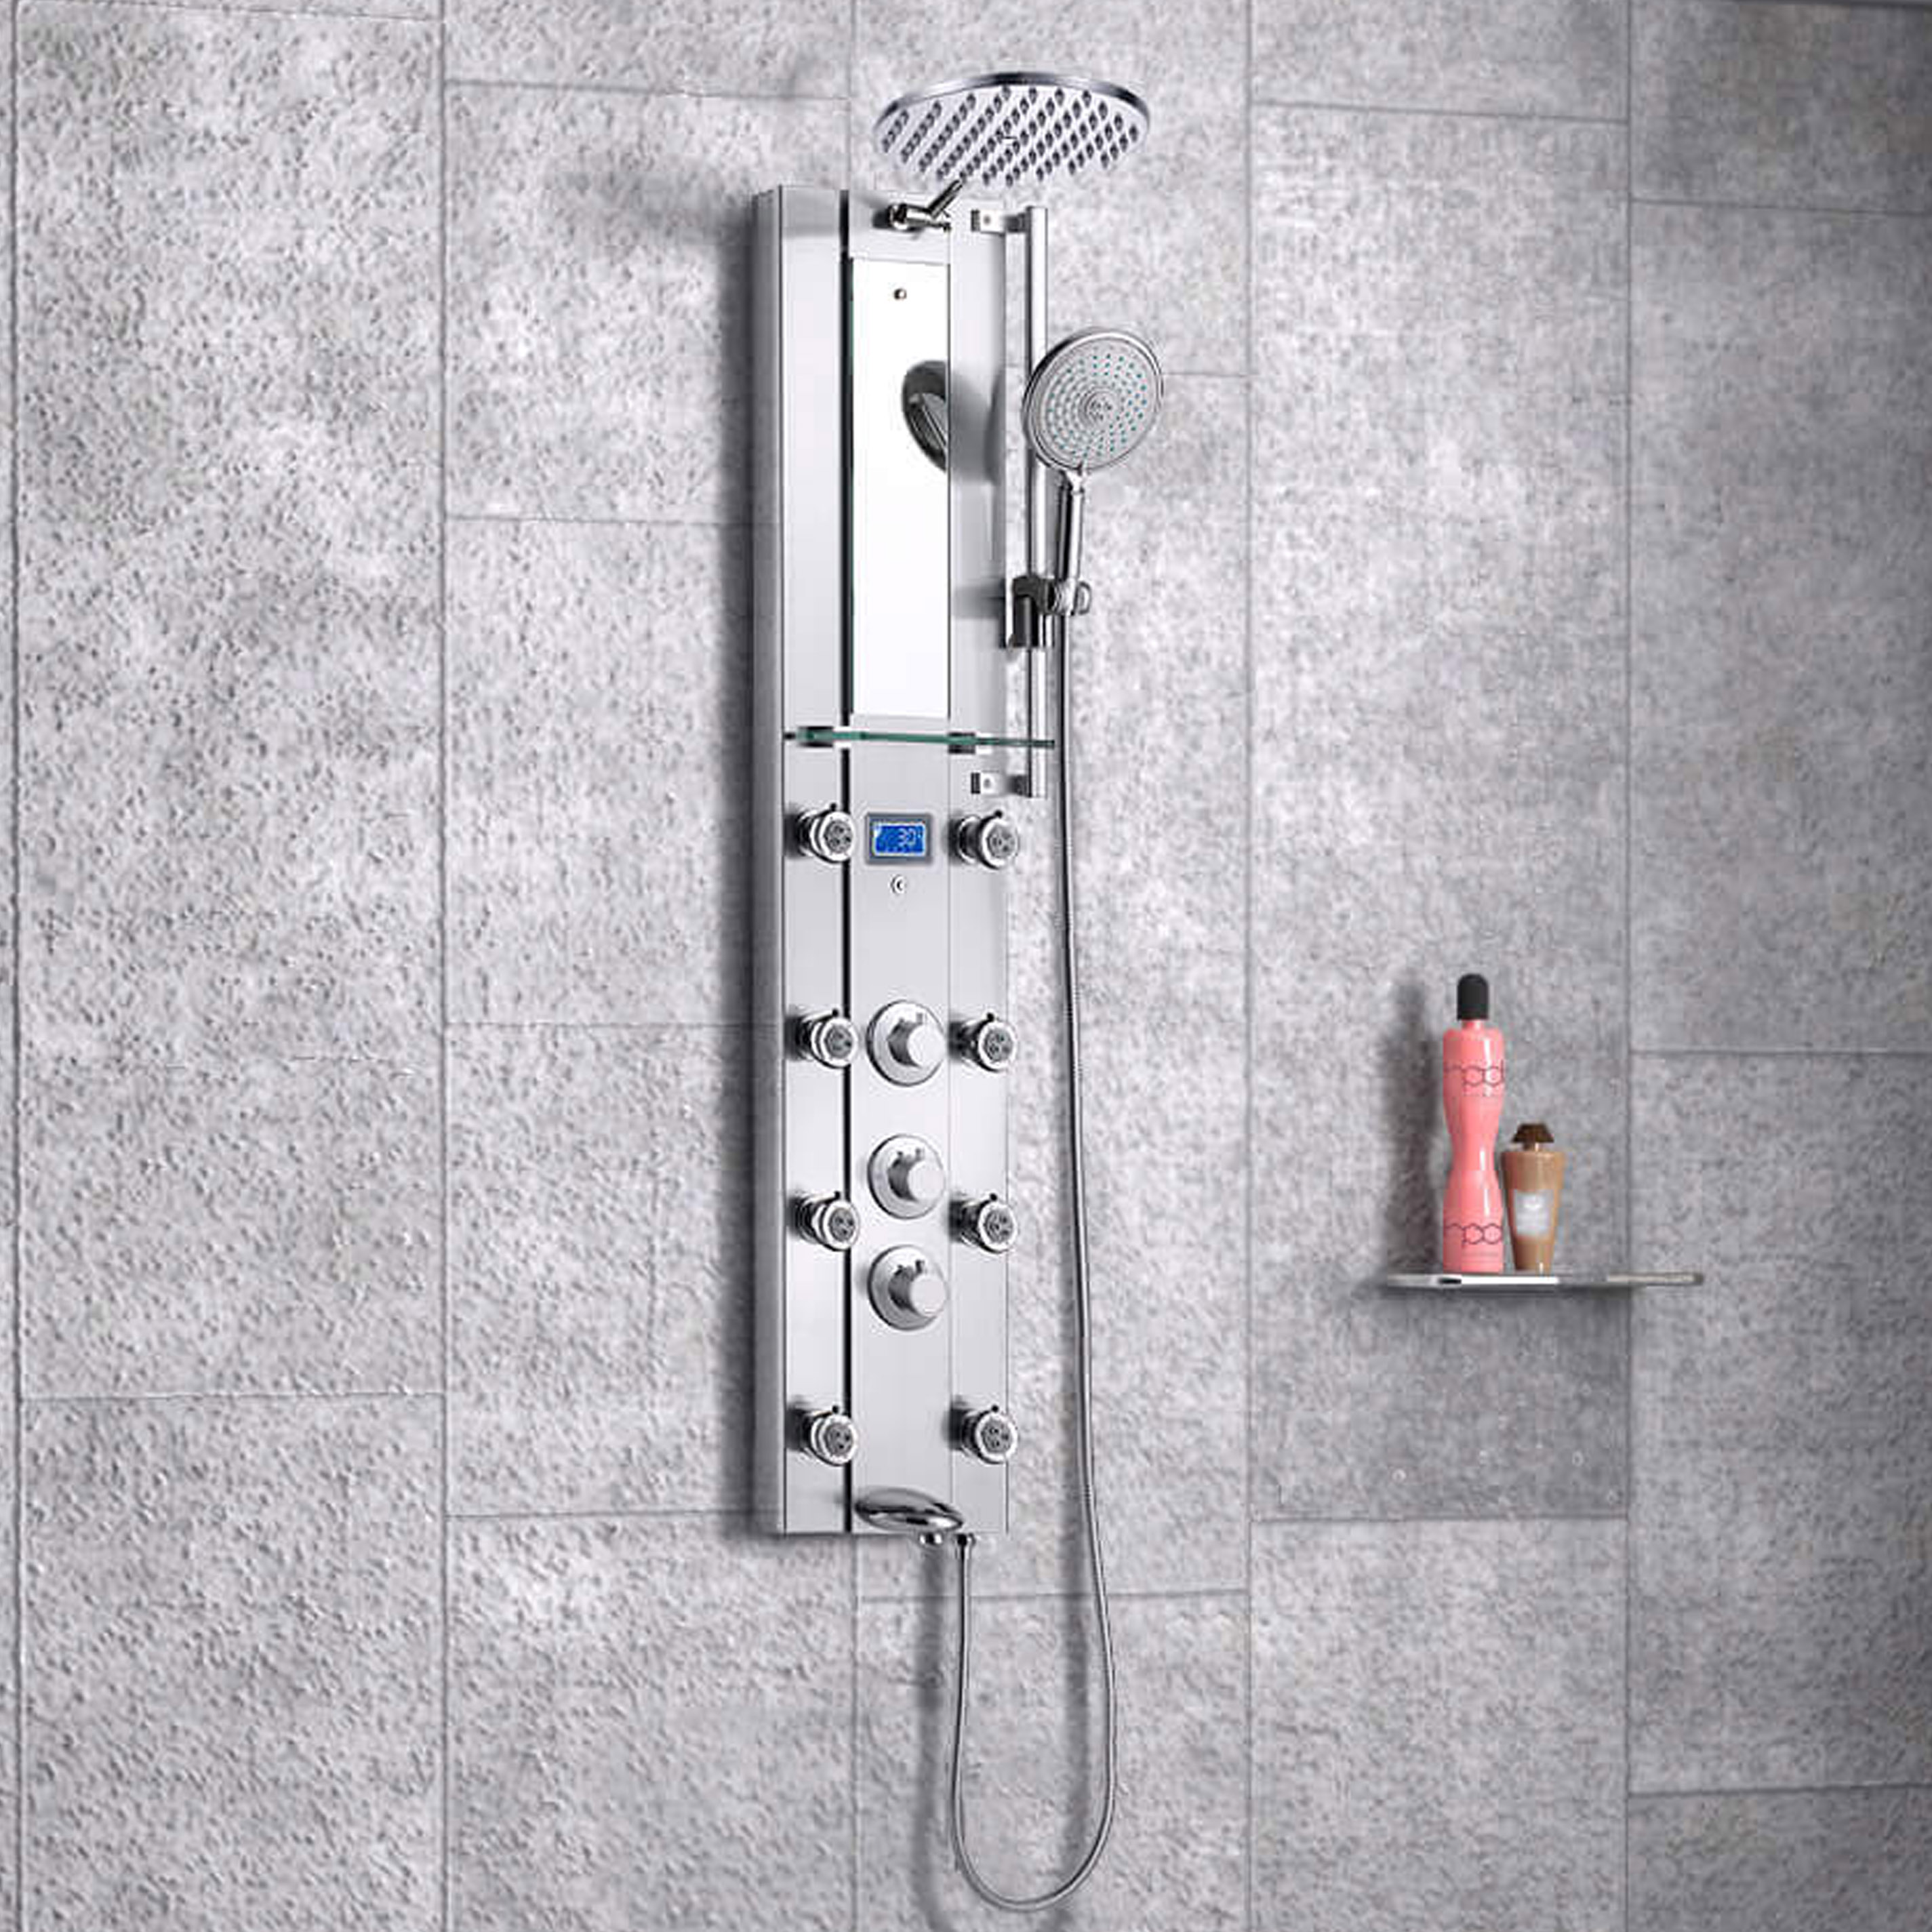 Blue Ocean 52” Stainless Steel SPV962332 Thermostatic